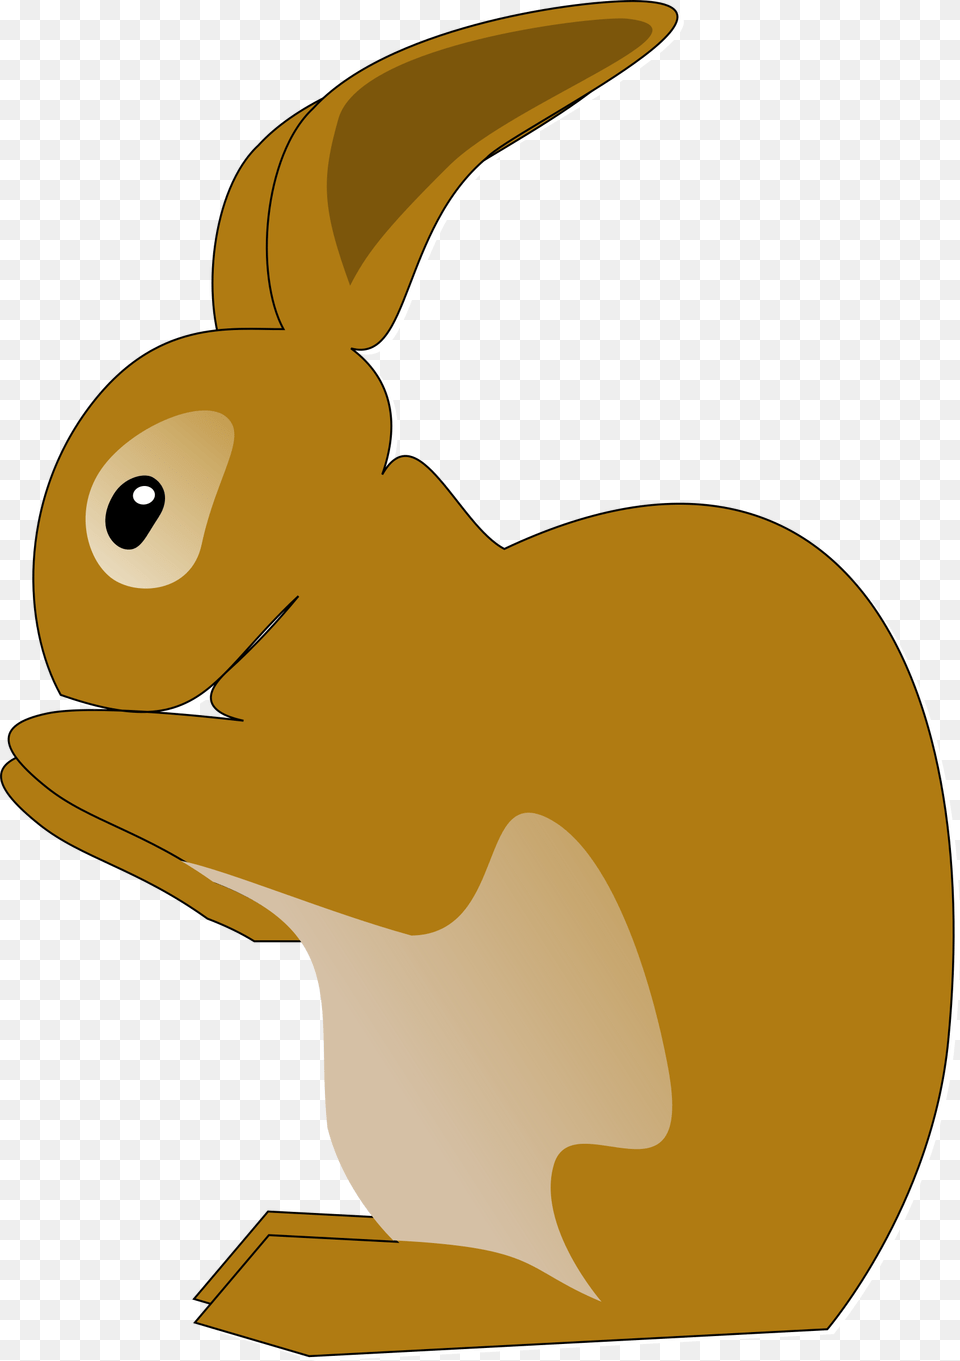 Clip Arts Related To Rabbit Clip Art, Animal, Mammal, Baby, Person Png Image